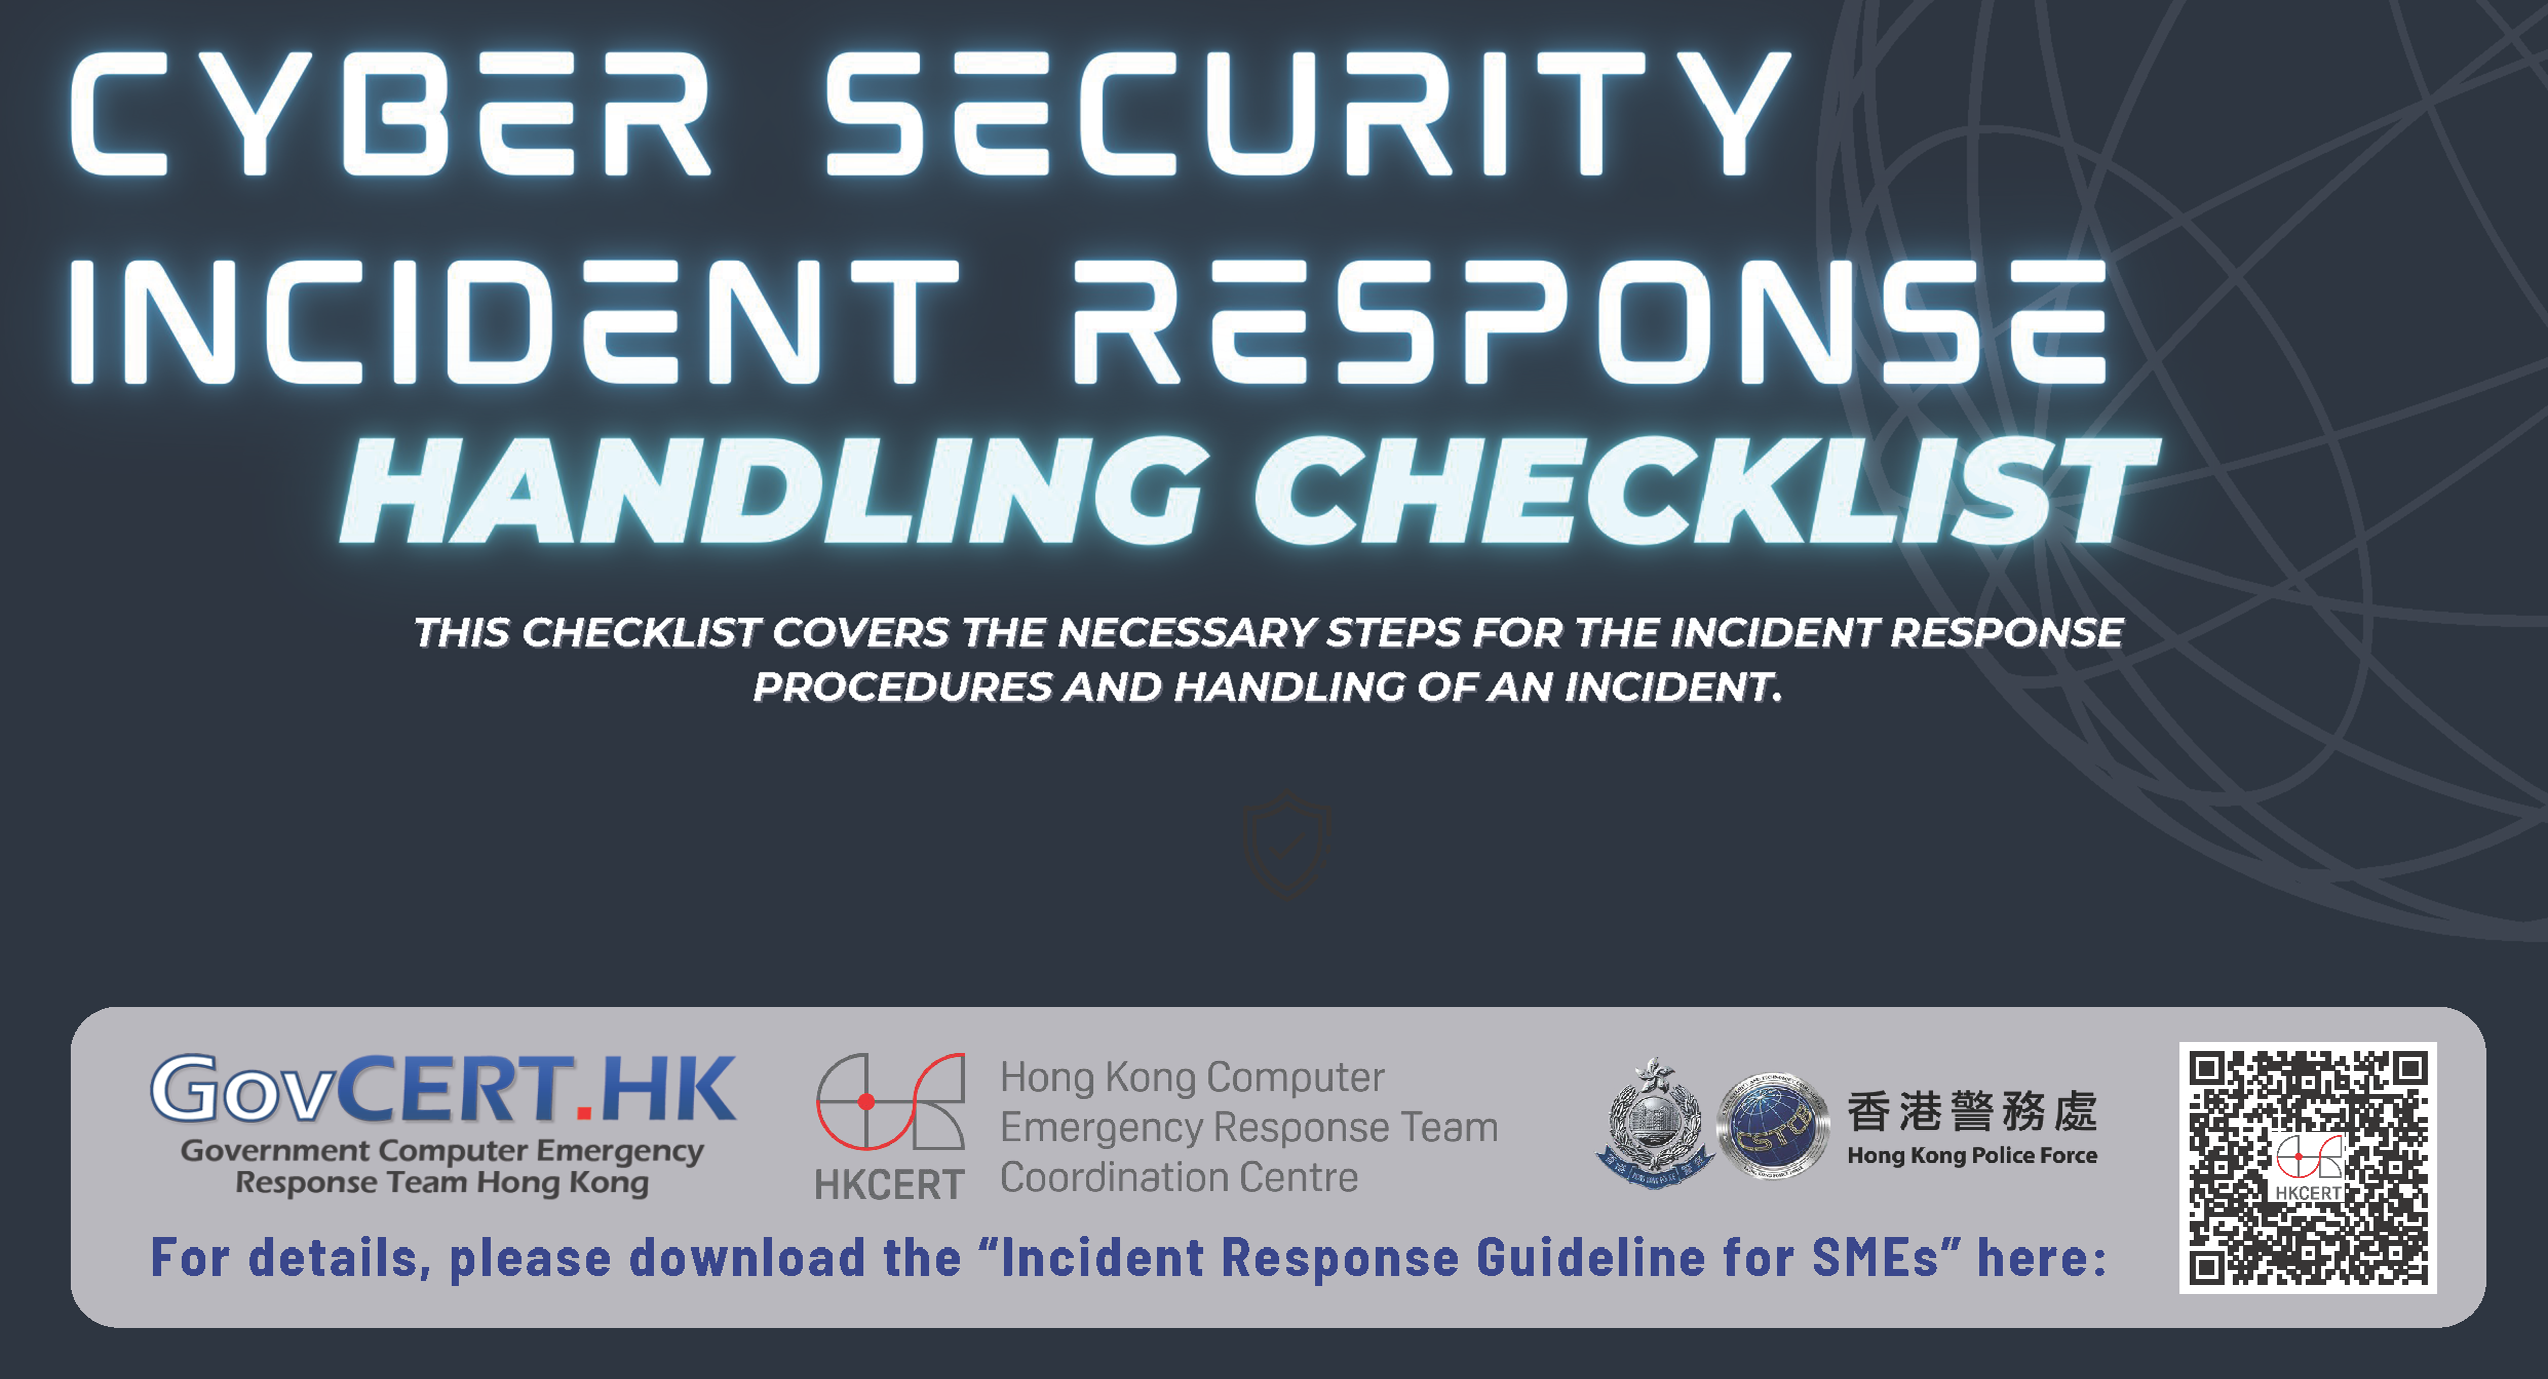 Cyber Security Incident Response Handling Checklist